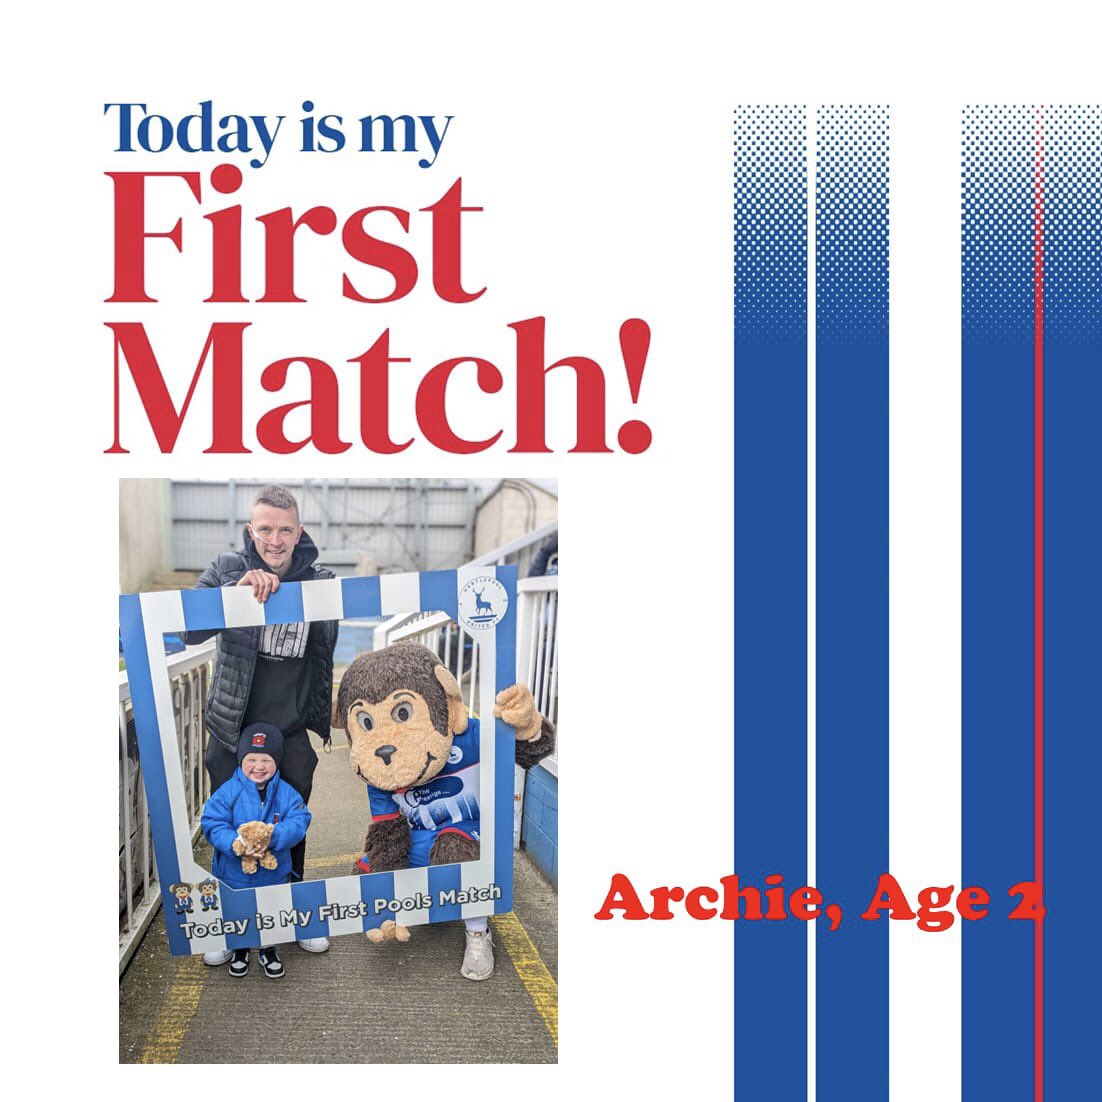 A very special welcome to Archie, age 2, who is celebrating his first Pools game today 🎉